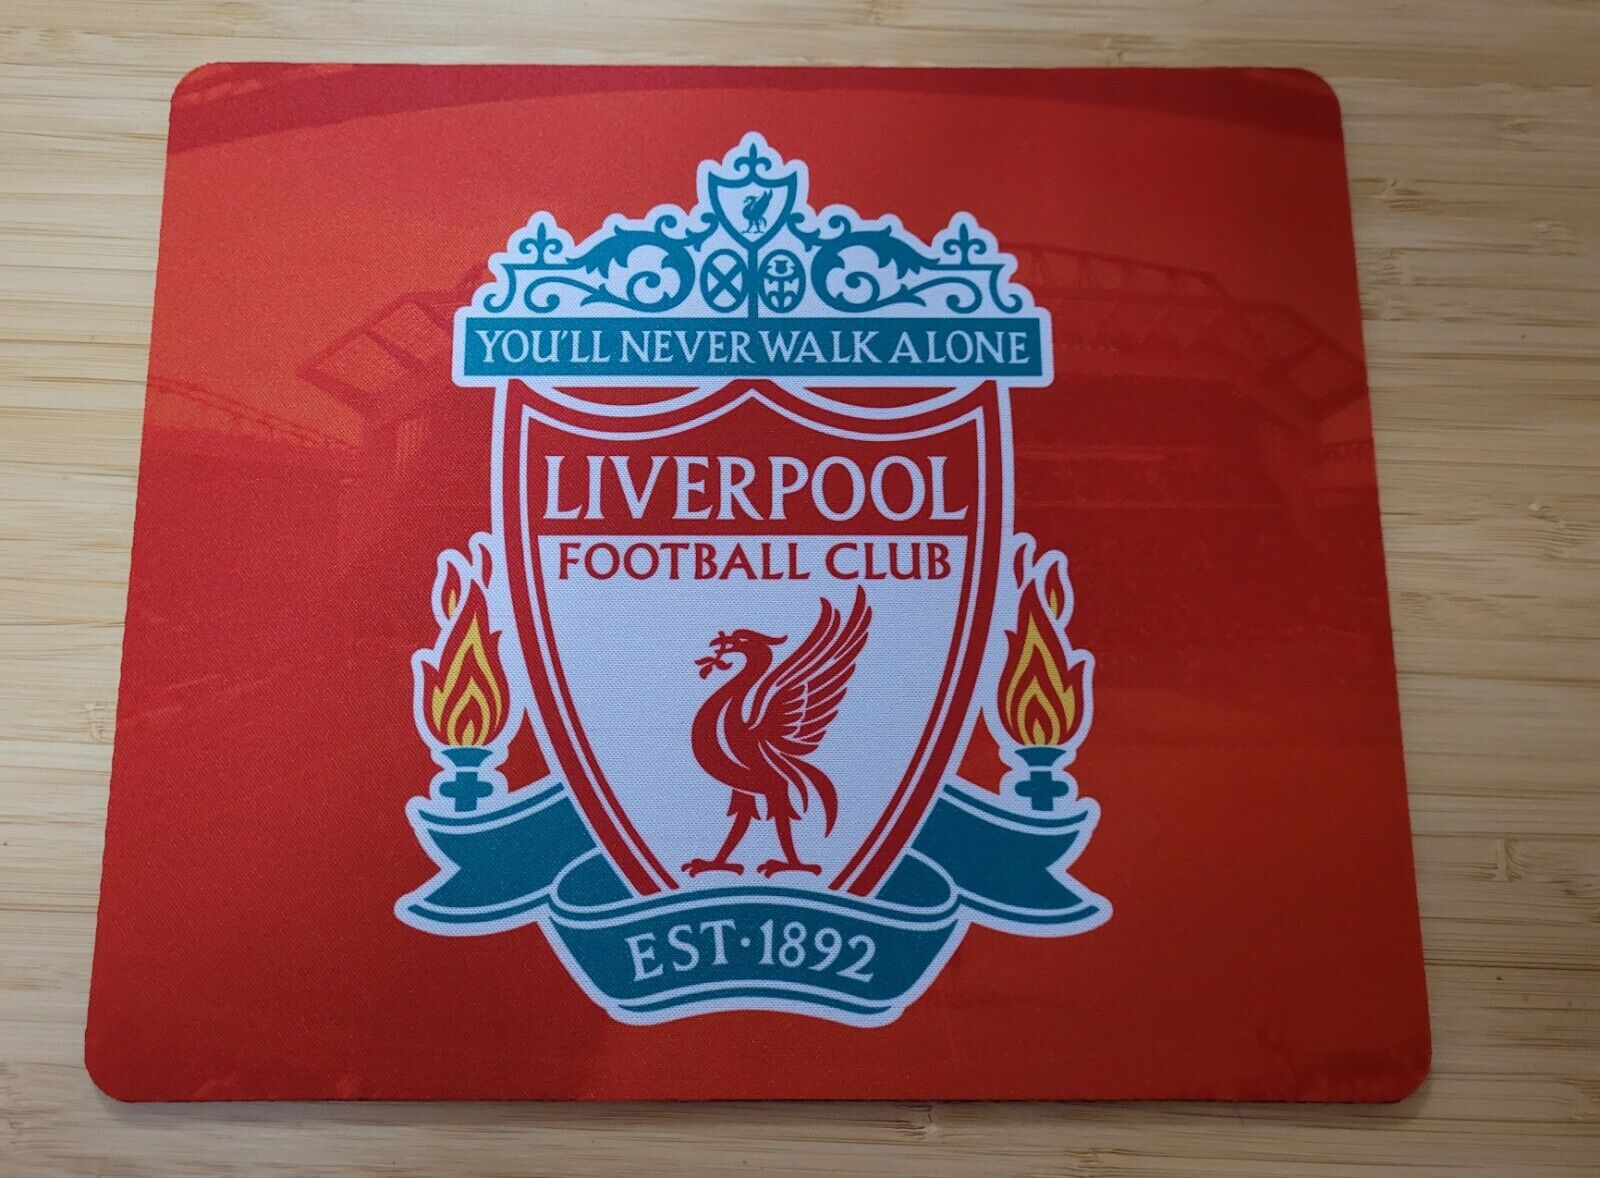 LIVERPOOL Mouse Pad Soccer Fútbol Computer Laptop Pc Mat 9.4 x 7.9 in 